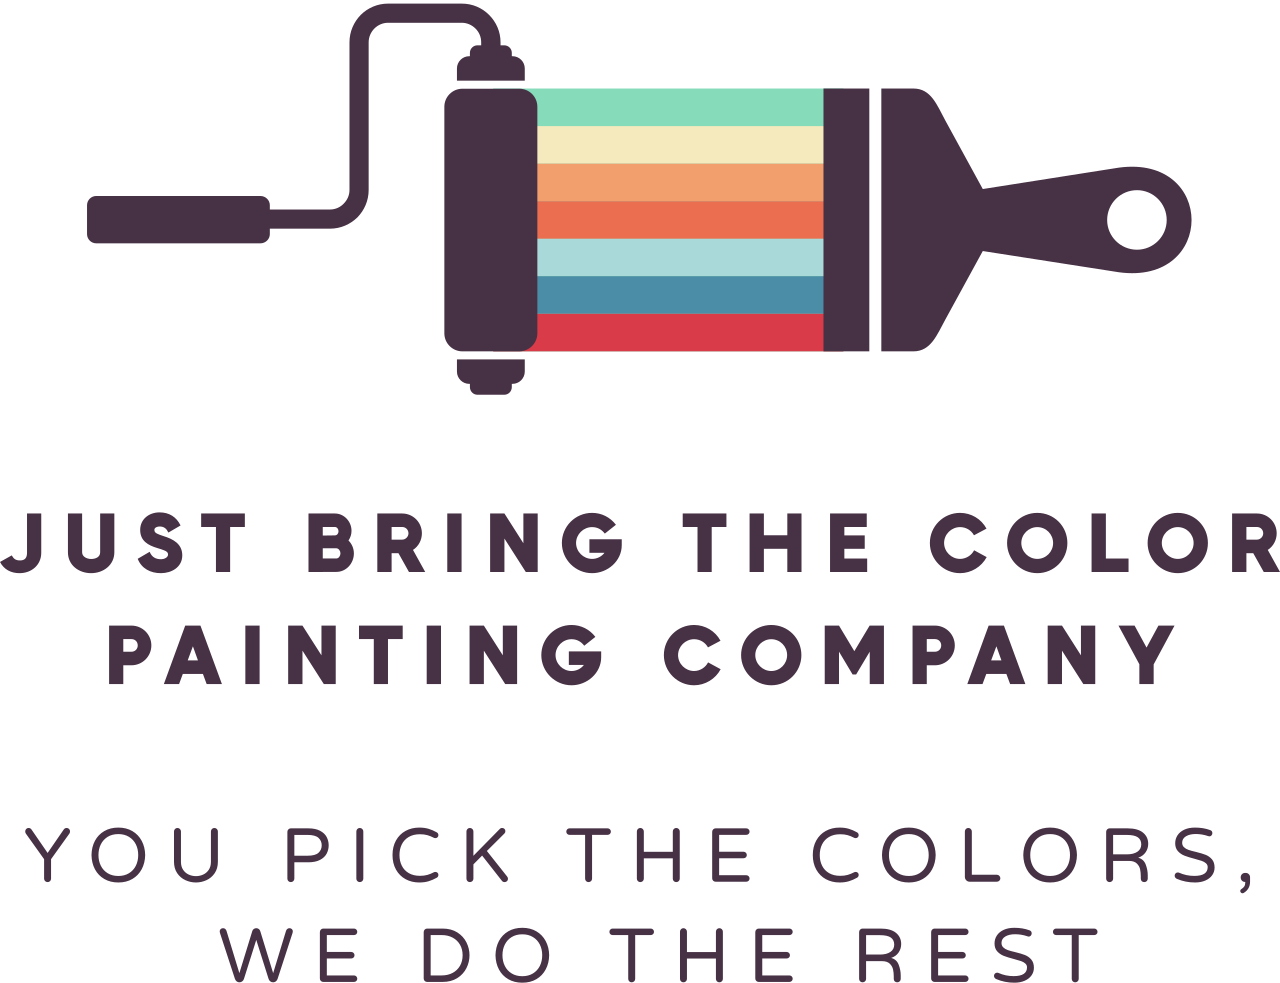 Just Bring The Color
Painting Company's logo